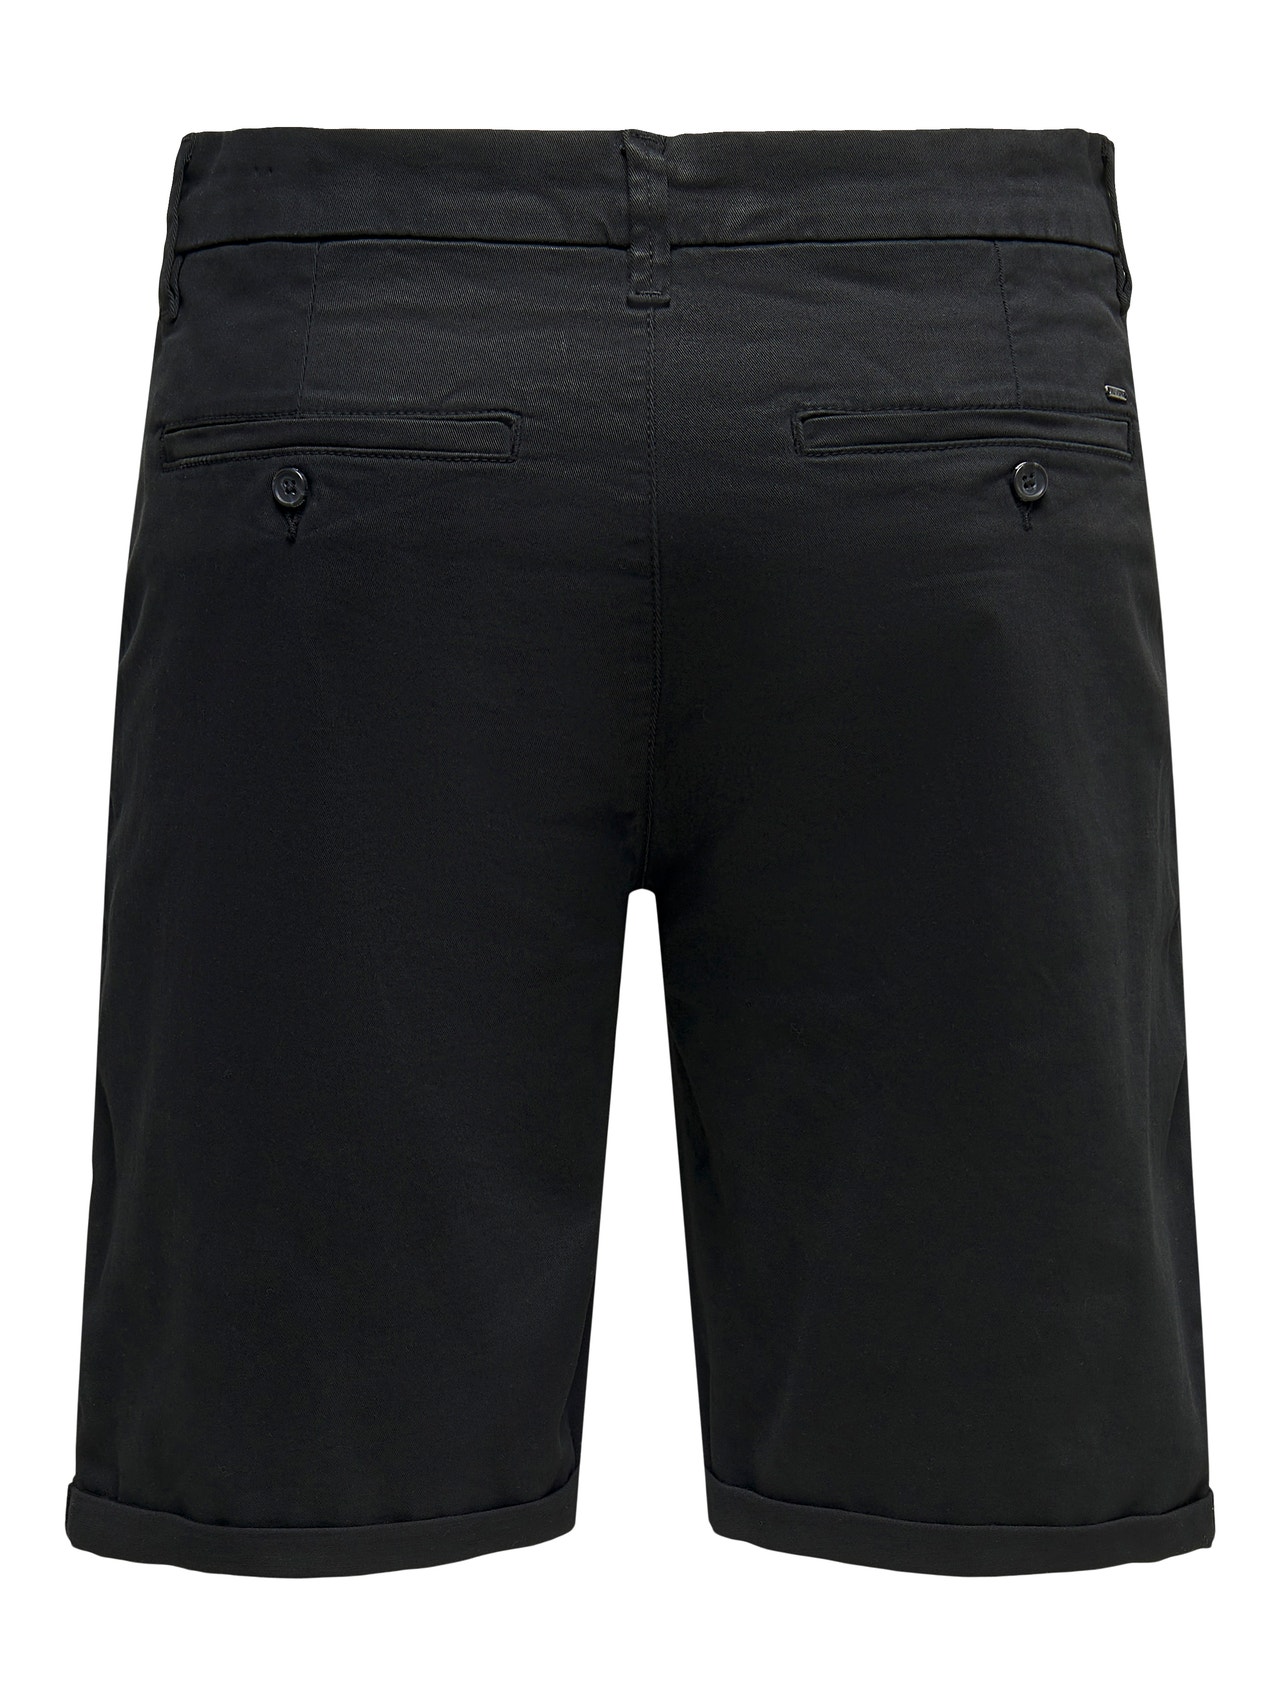 ONLY & SONS solid color chino shorts -Black - 22021460